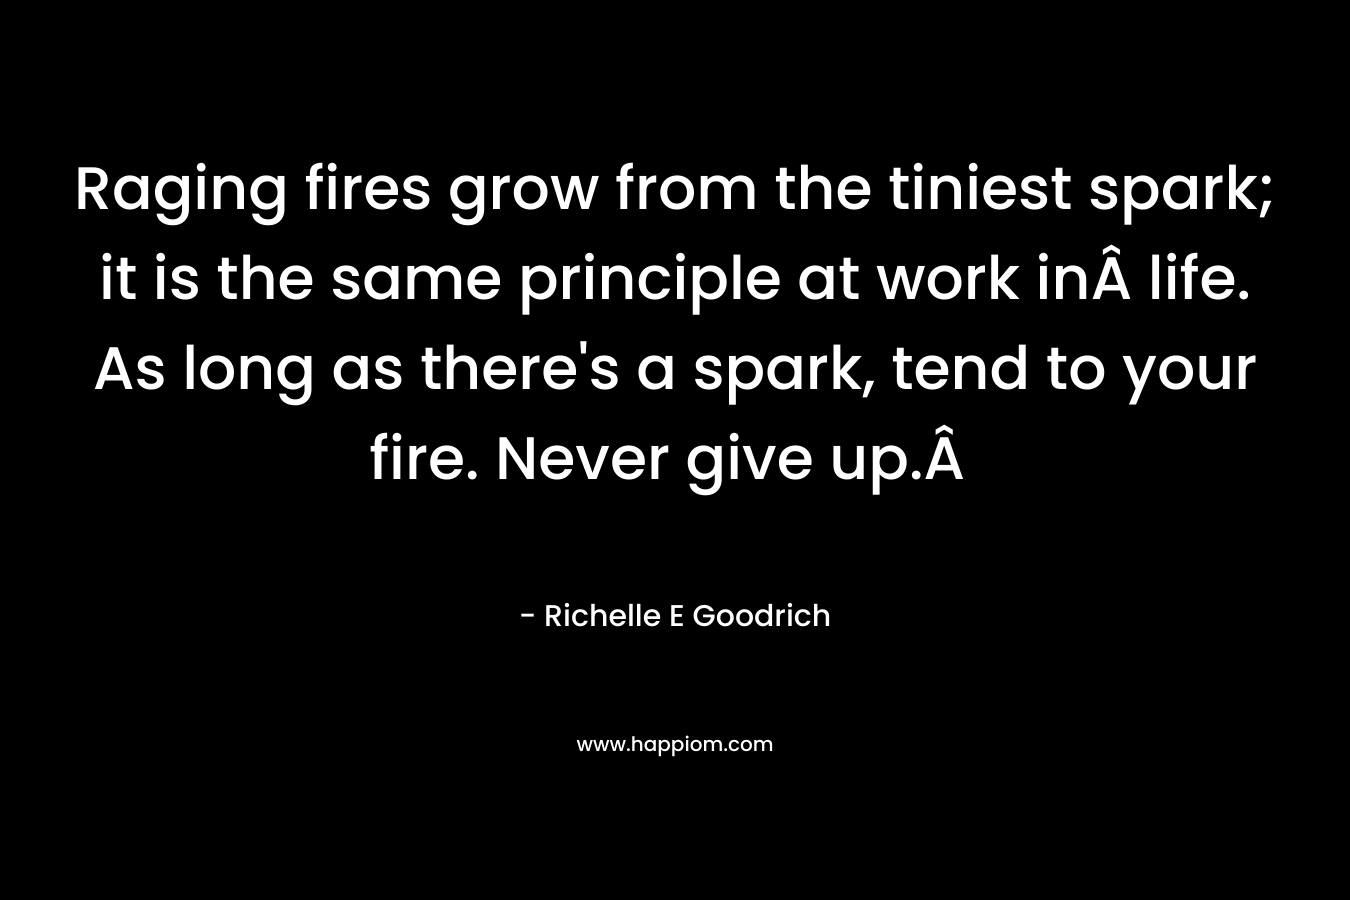 Raging fires grow from the tiniest spark; it is the same principle at work inÂ life. As long as there’s a spark, tend to your fire. Never give up.Â  – Richelle E Goodrich